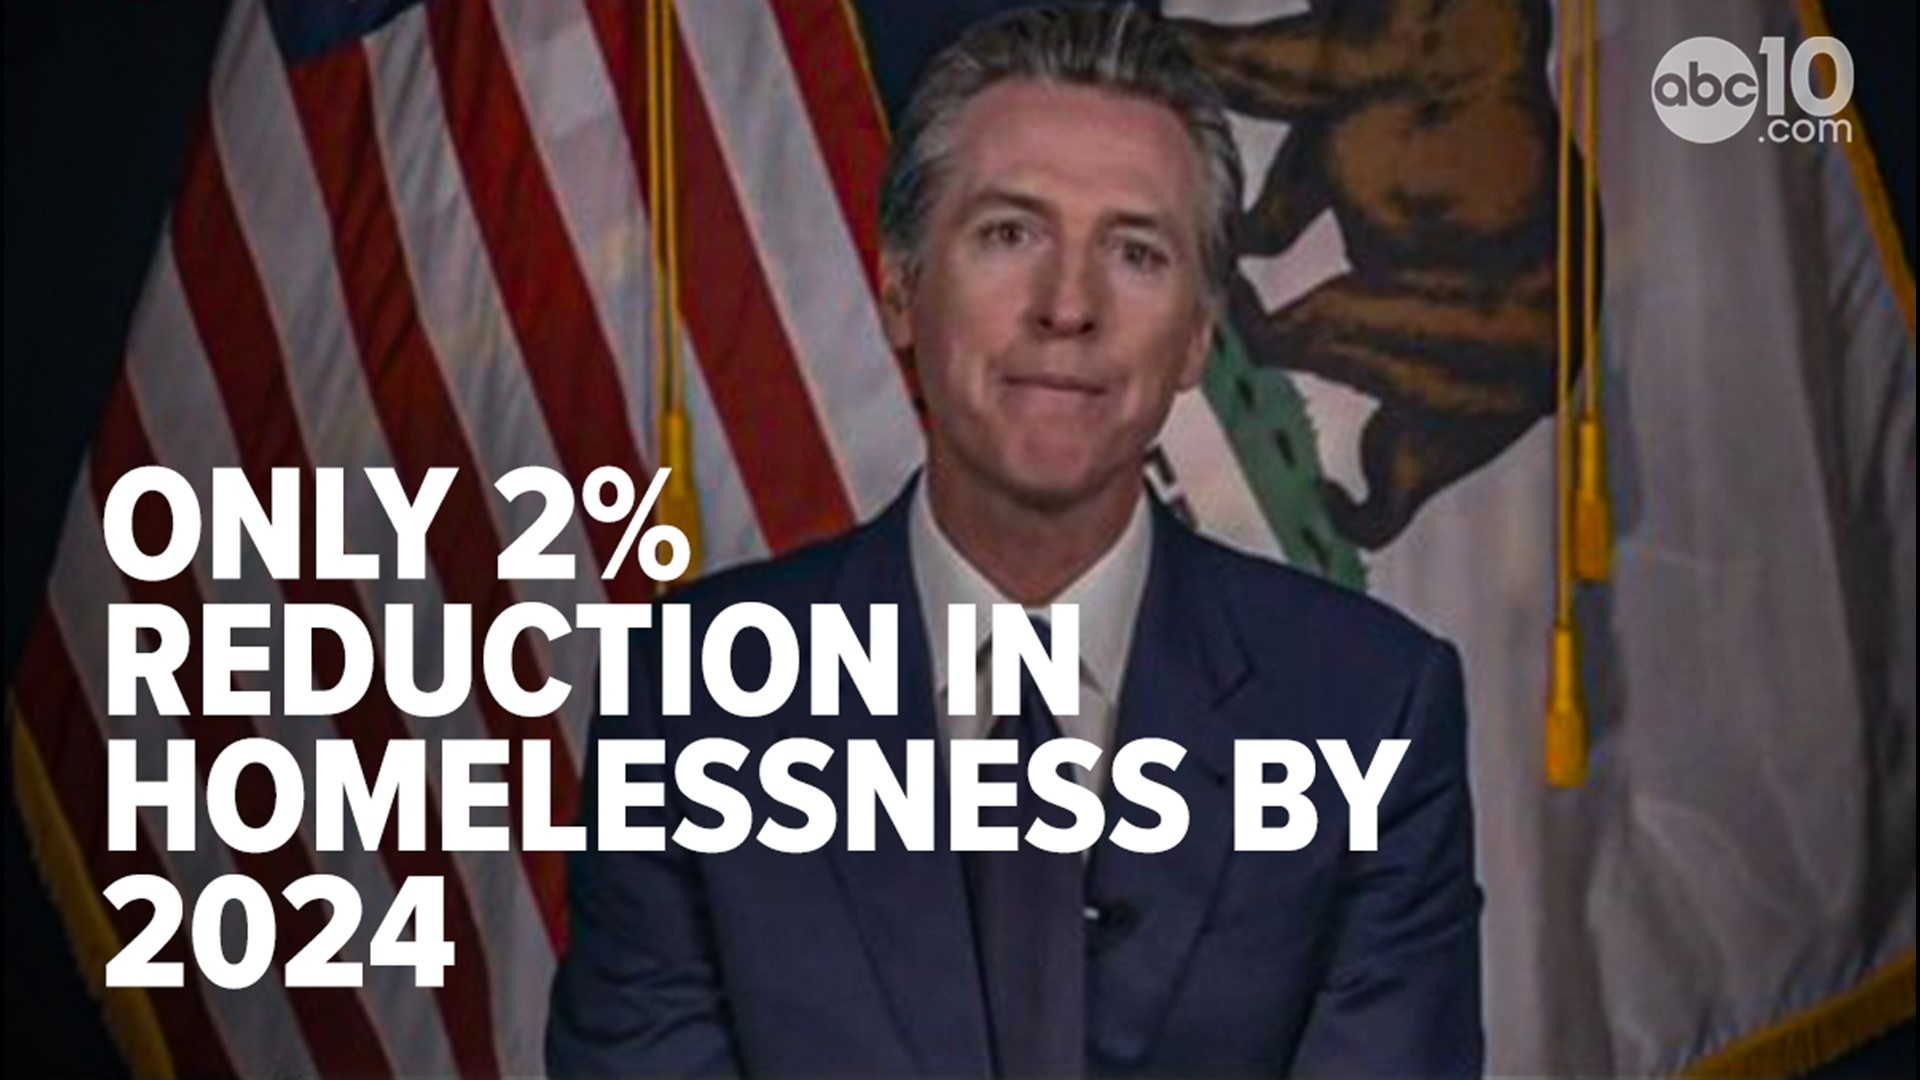 Reaction to Newsom withholding homeless funds | abc10.com